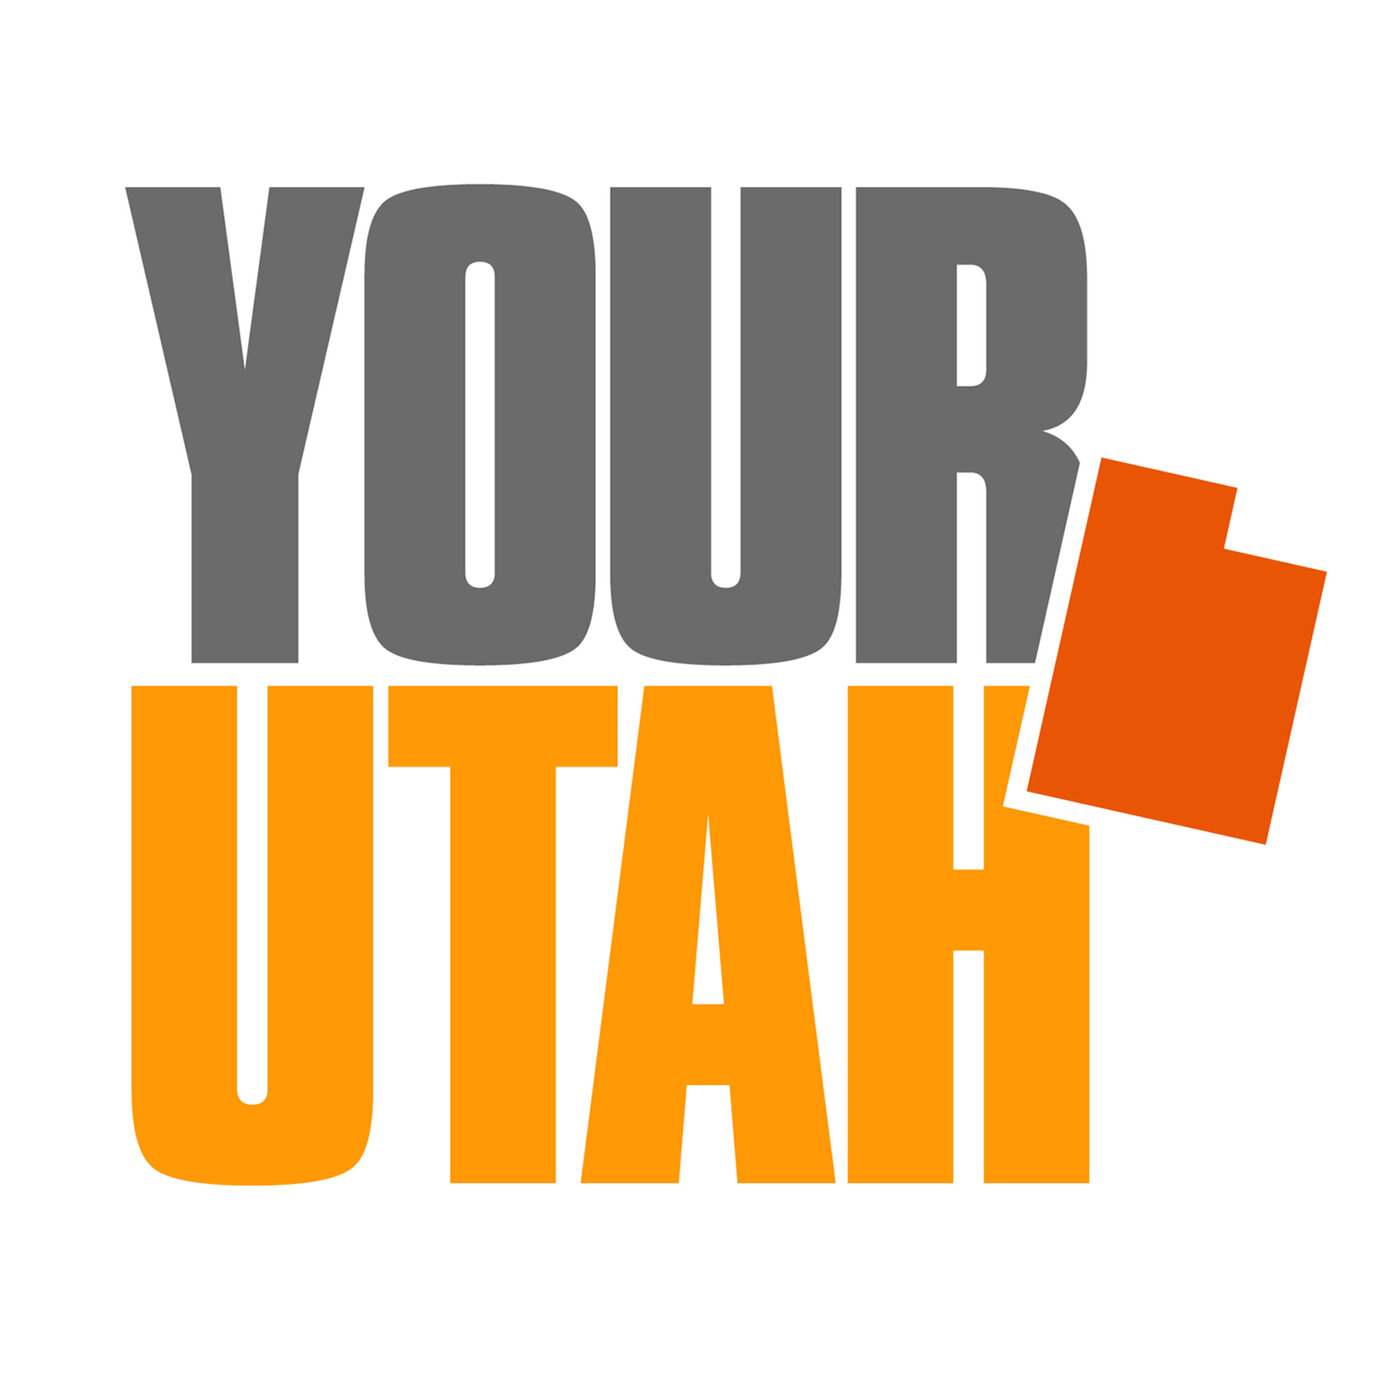 UTAH! This Is Your Only Chance To Try Out Some Real Military Grade Weapons